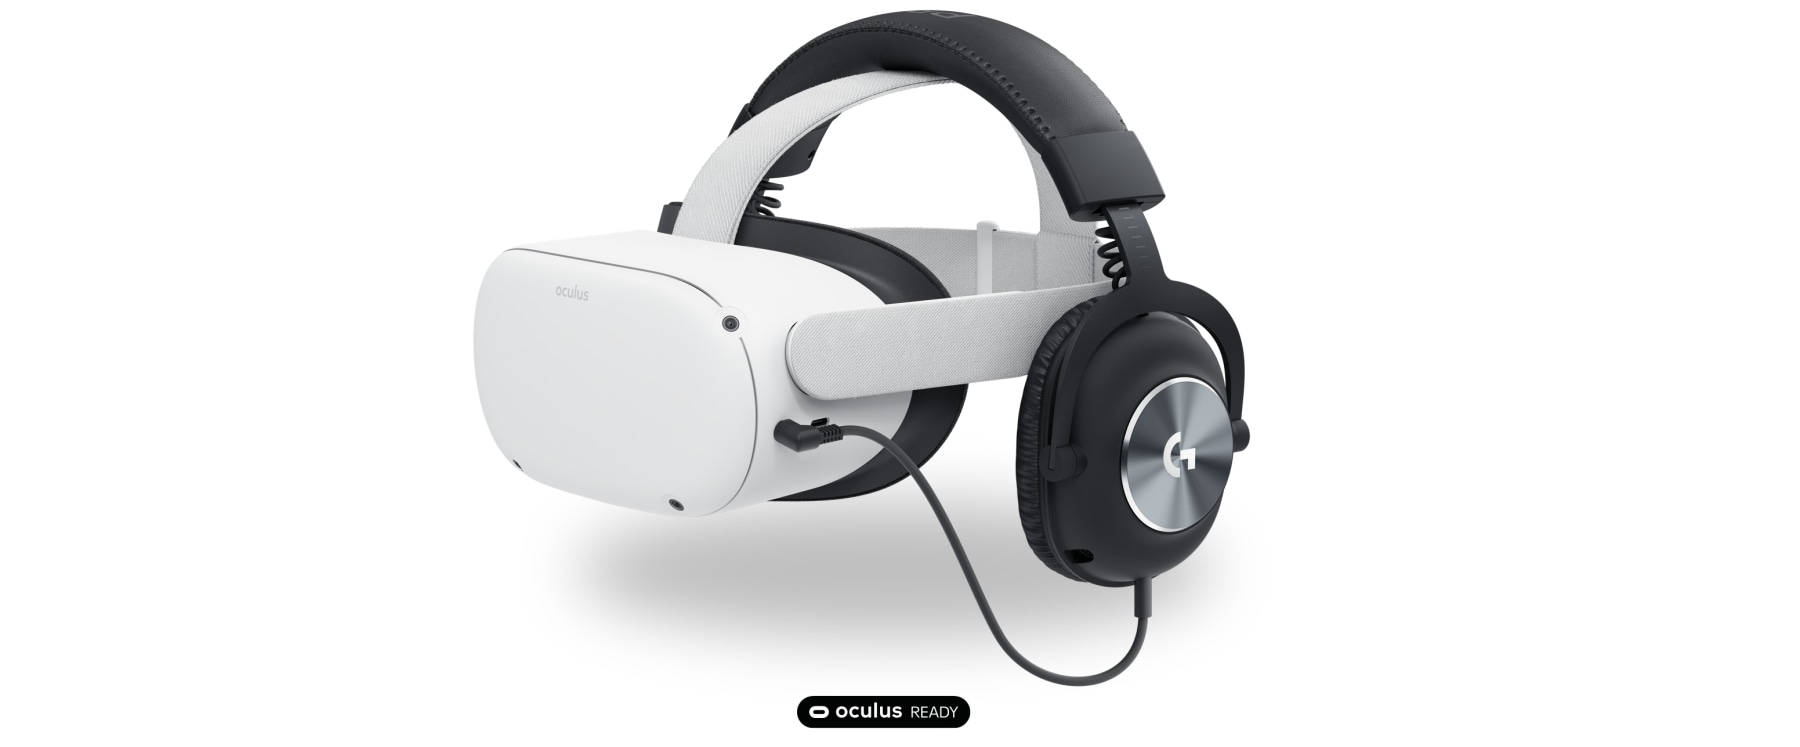 PRO Gaming Headset for Oculus Quest 2 